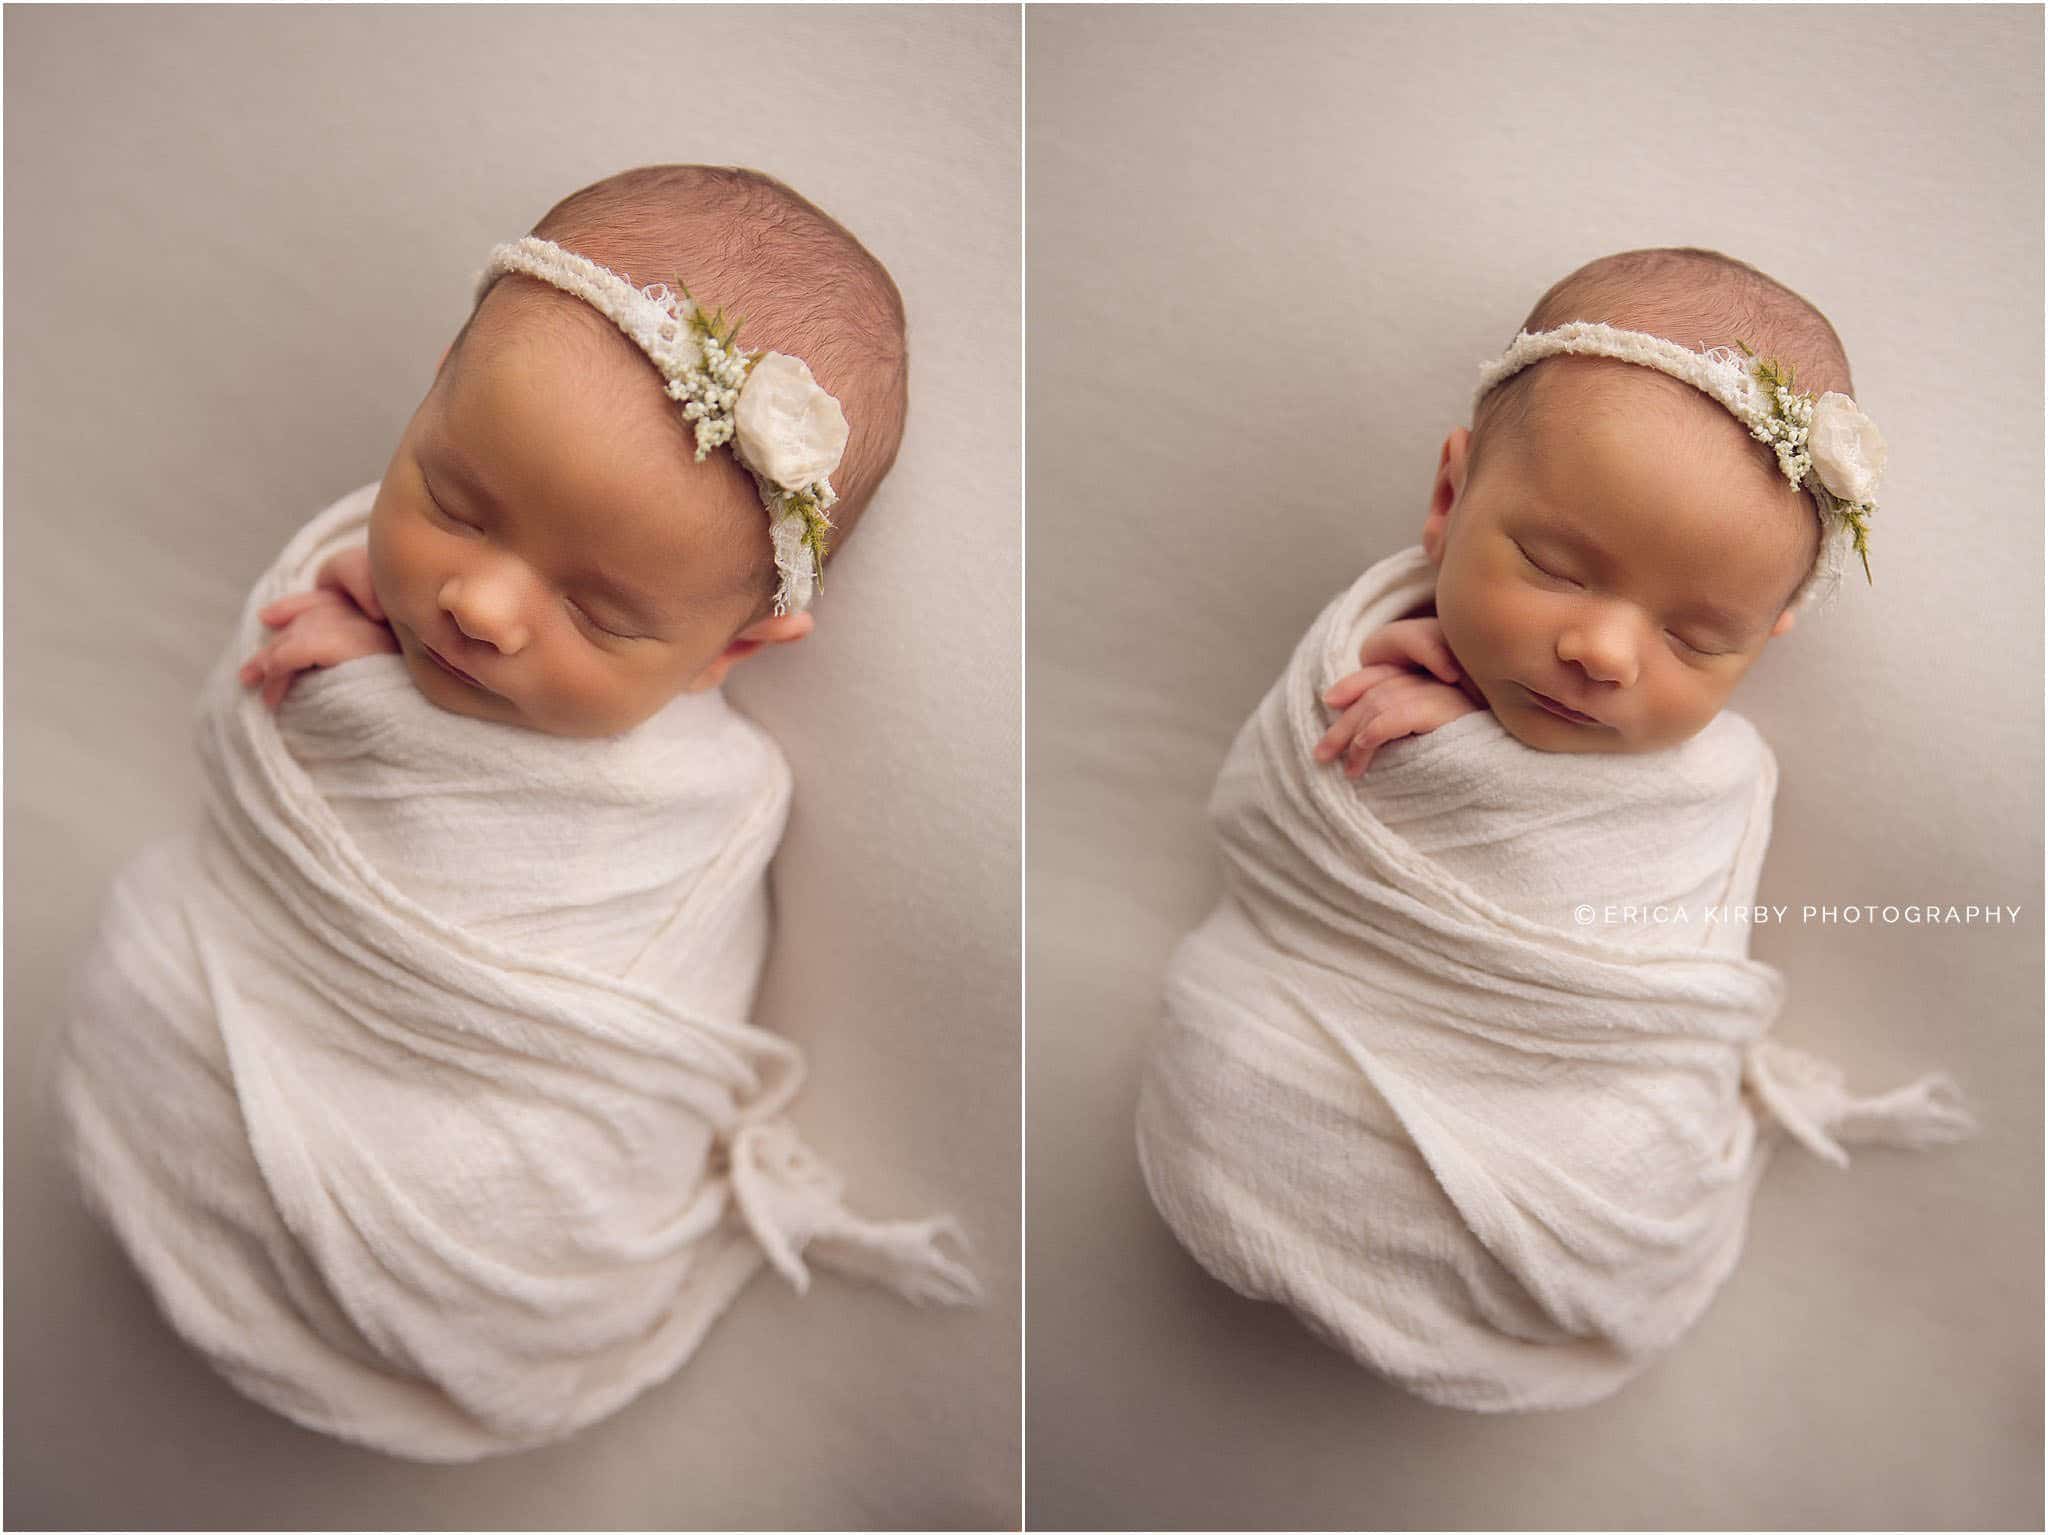 Newborn Photography Bentonville AR | Newborn Baby girl photography session in NWA  with soft colors and floral accents | Erica Kirby Photography